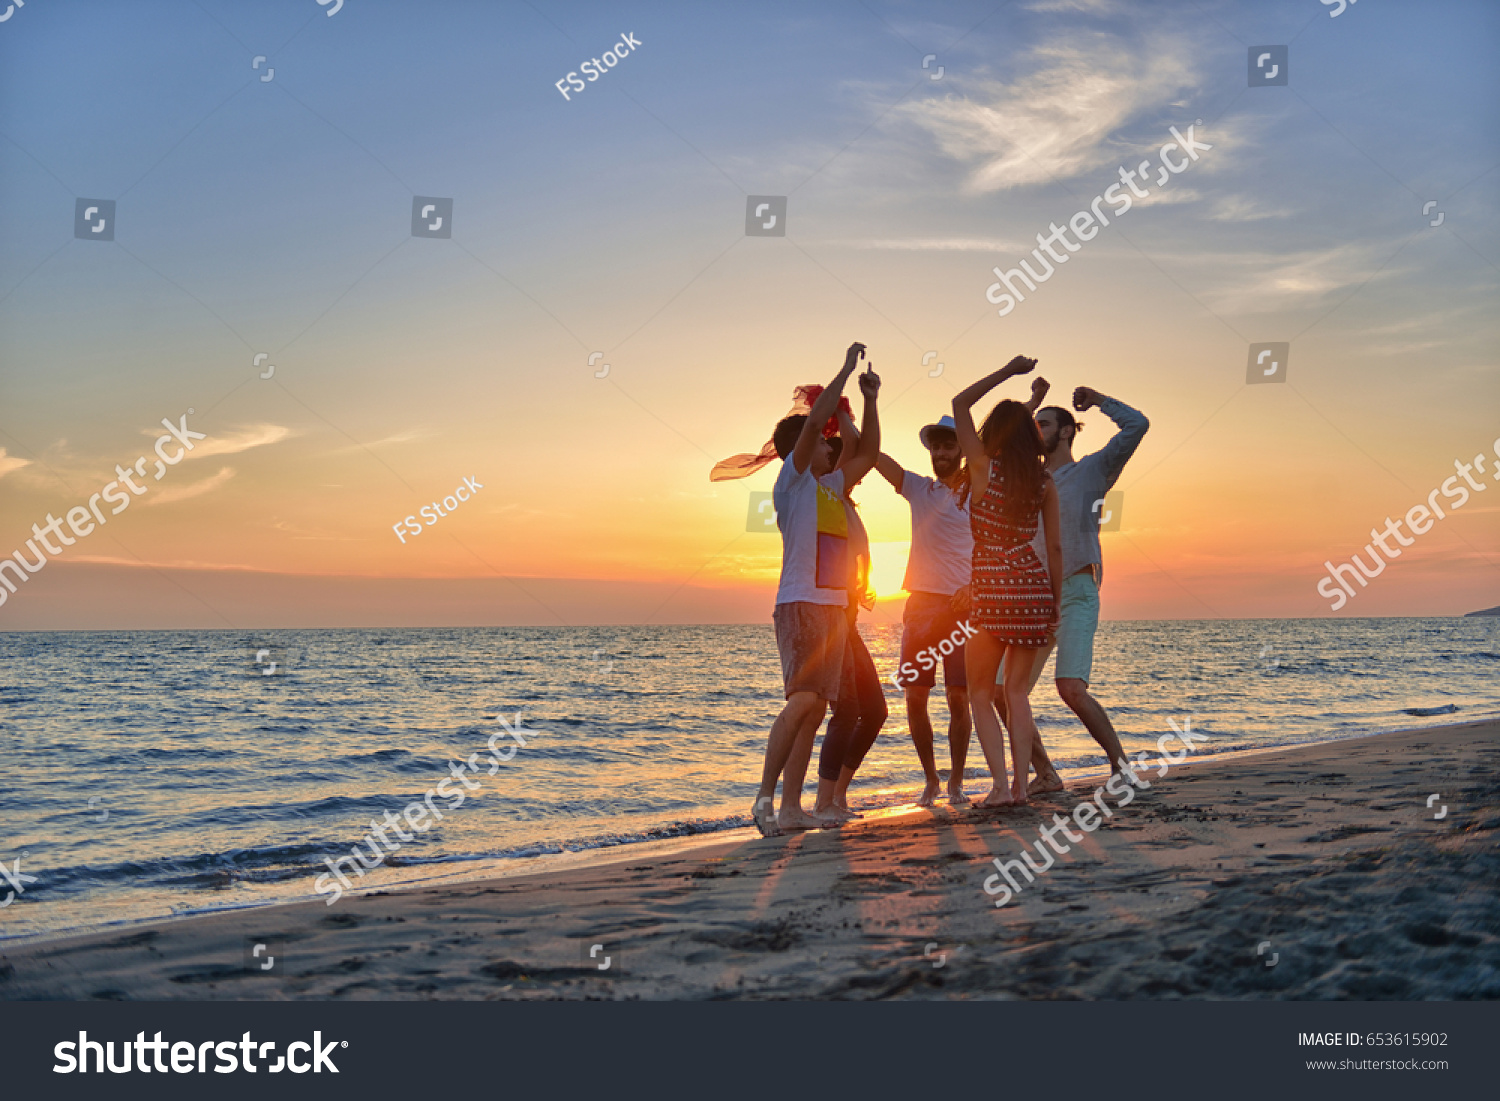 group of happy young people dancing at the beach on beautiful summer sunset #653615902